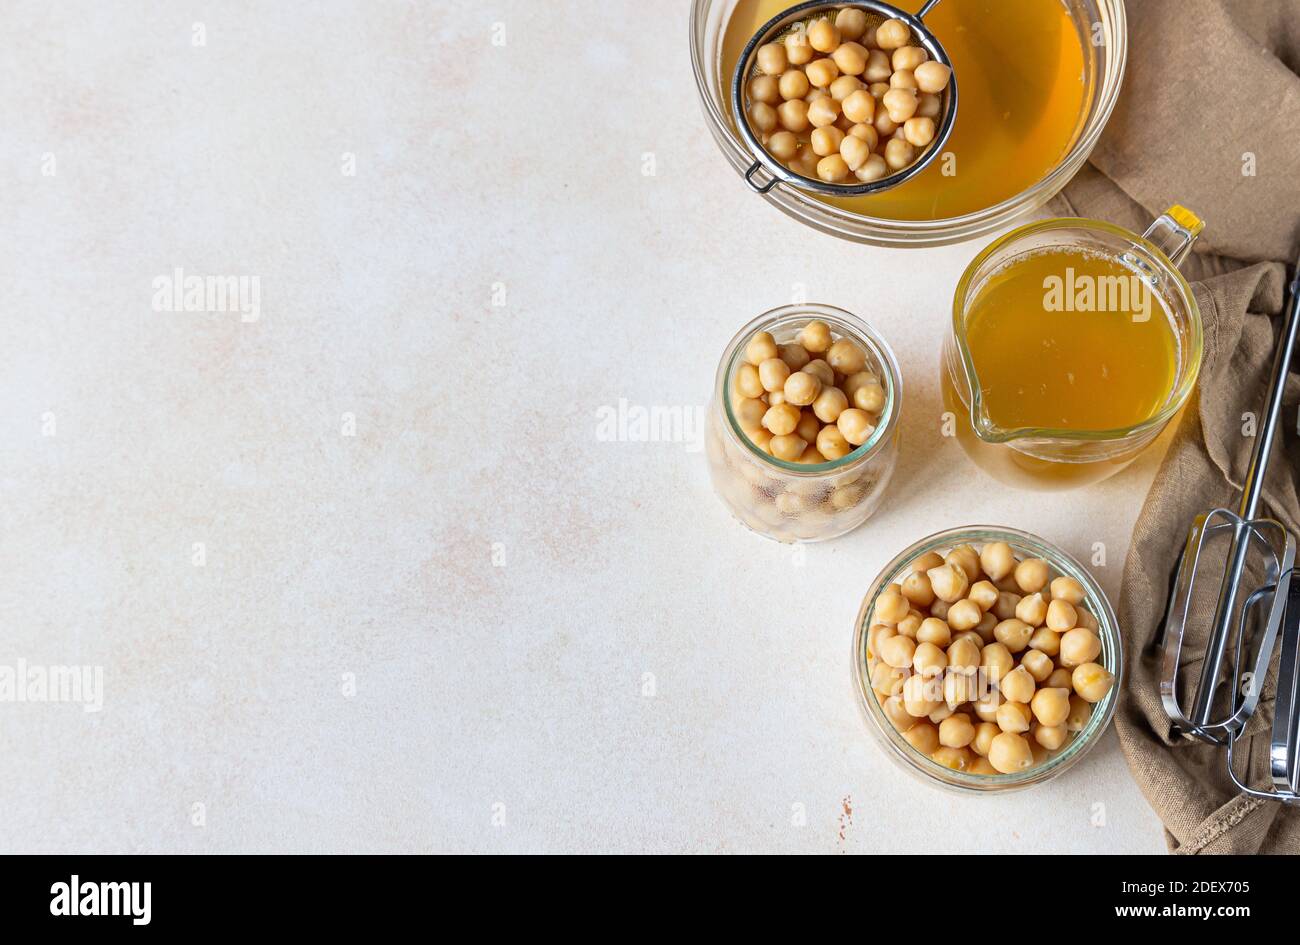 Boiled Chickpea And Aquafaba Egg Replacement For Vegan Recipe Vegan Cooking Concept Healthy Product Selective Focus Top View Stock Photo Alamy